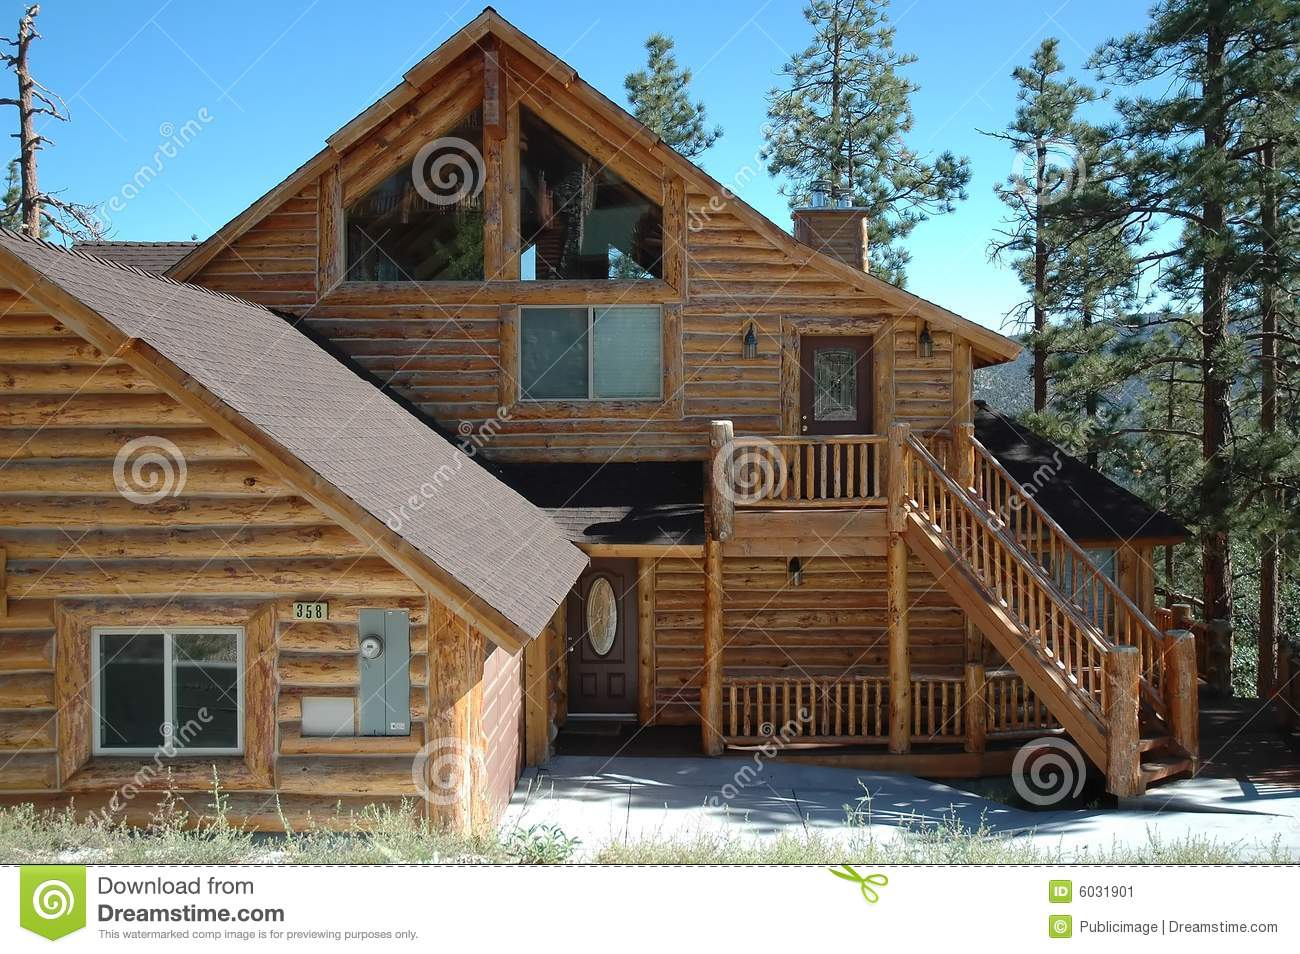 Log Cabin Style Home Stock Image   Image  6031901